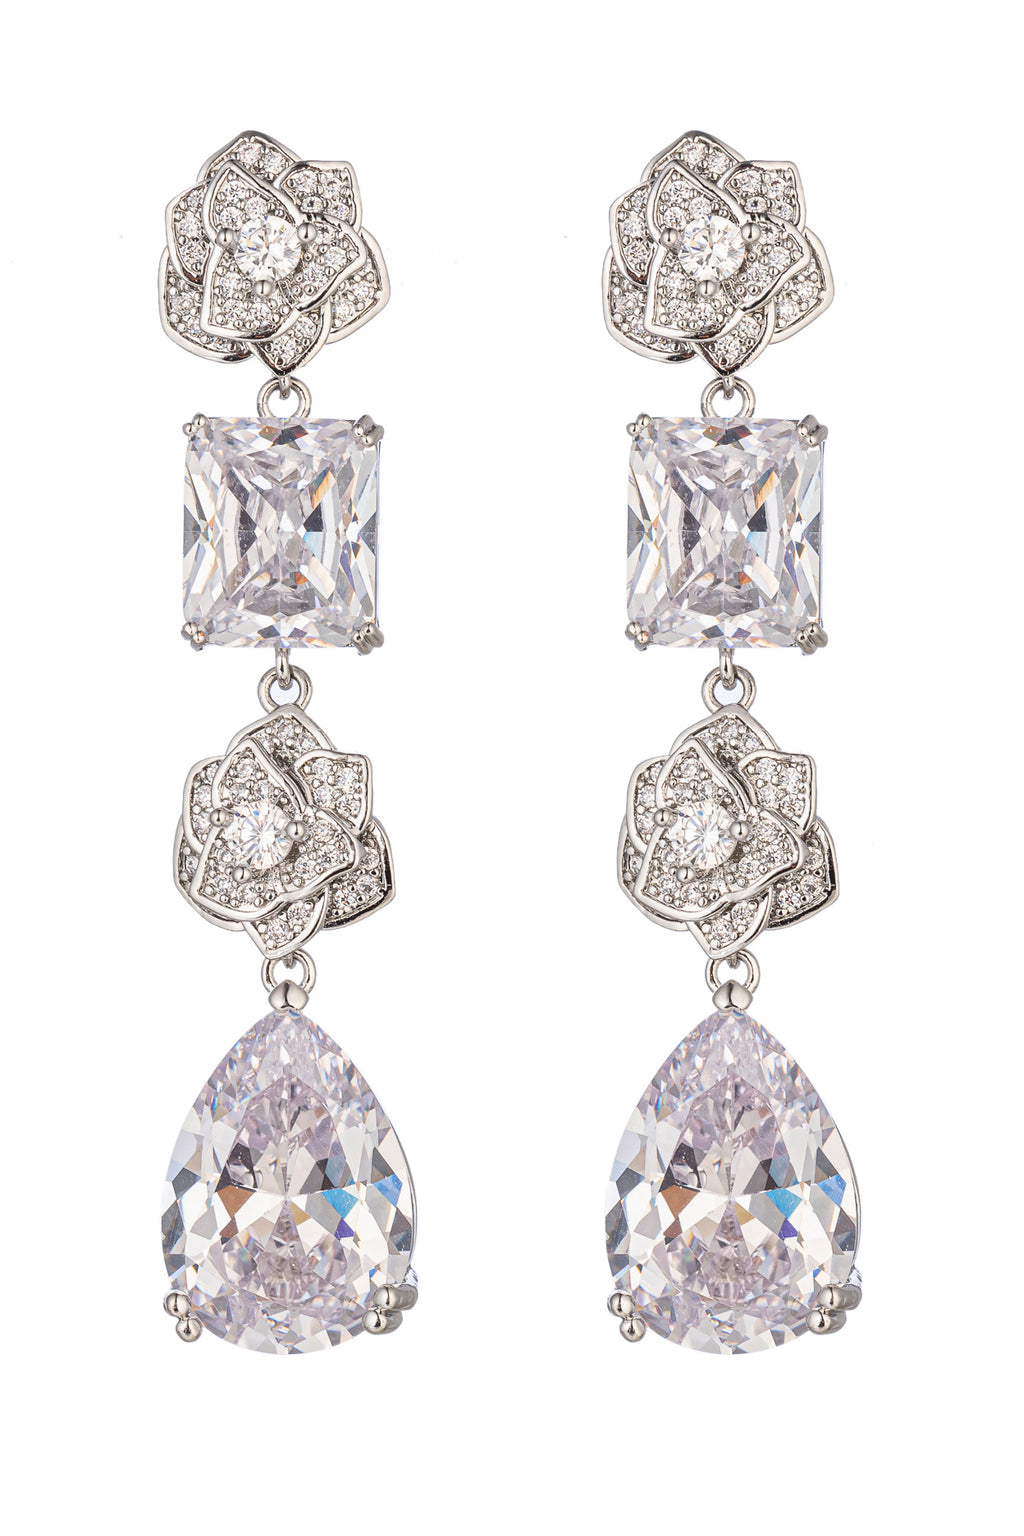 Silver drop earrings studded with cubic zirconia.